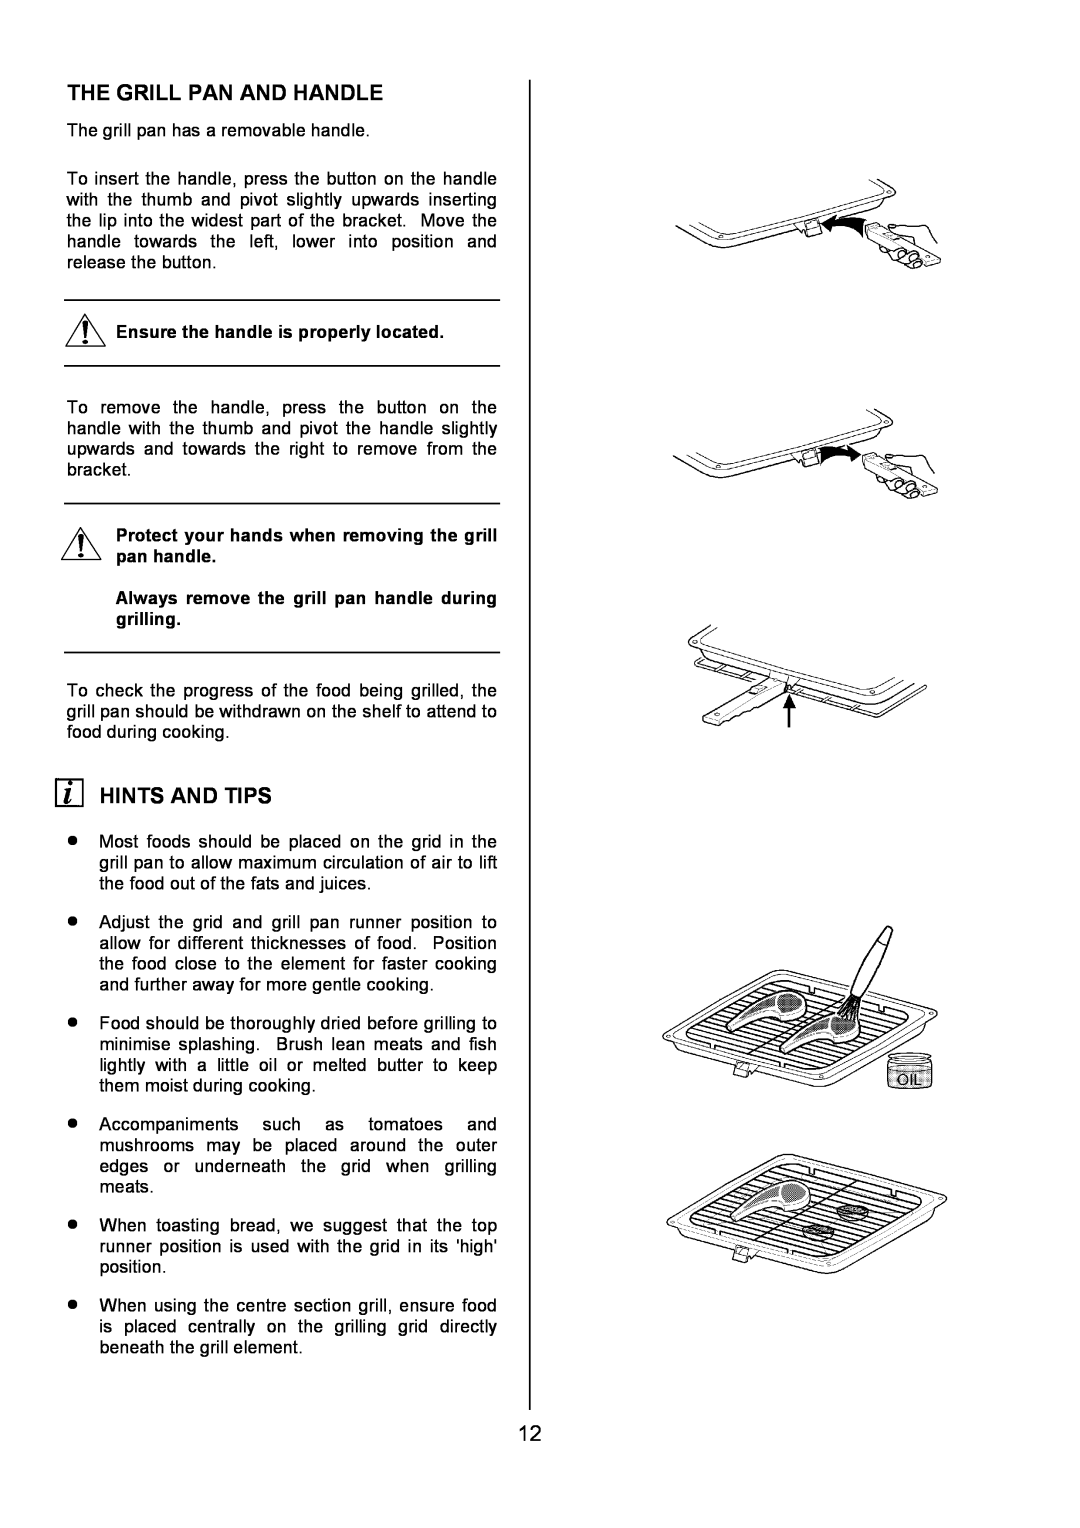 Electrolux U3100-4 manual The Grill Pan And Handle, Hints And Tips, Ensure the handle is properly located 